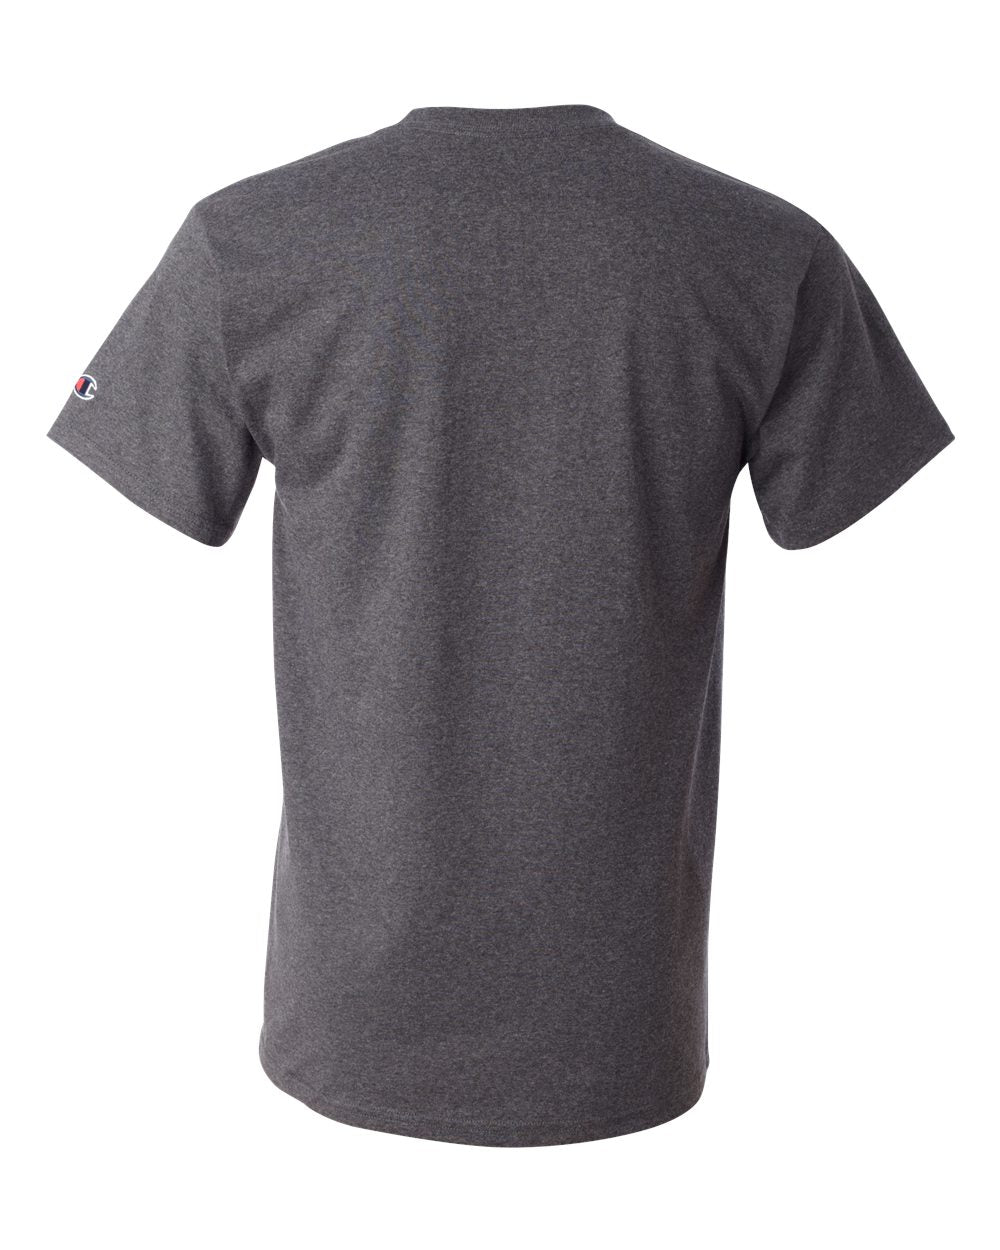 Champion Short Sleeve T-Shirt T425 #color_Charcoal Heather